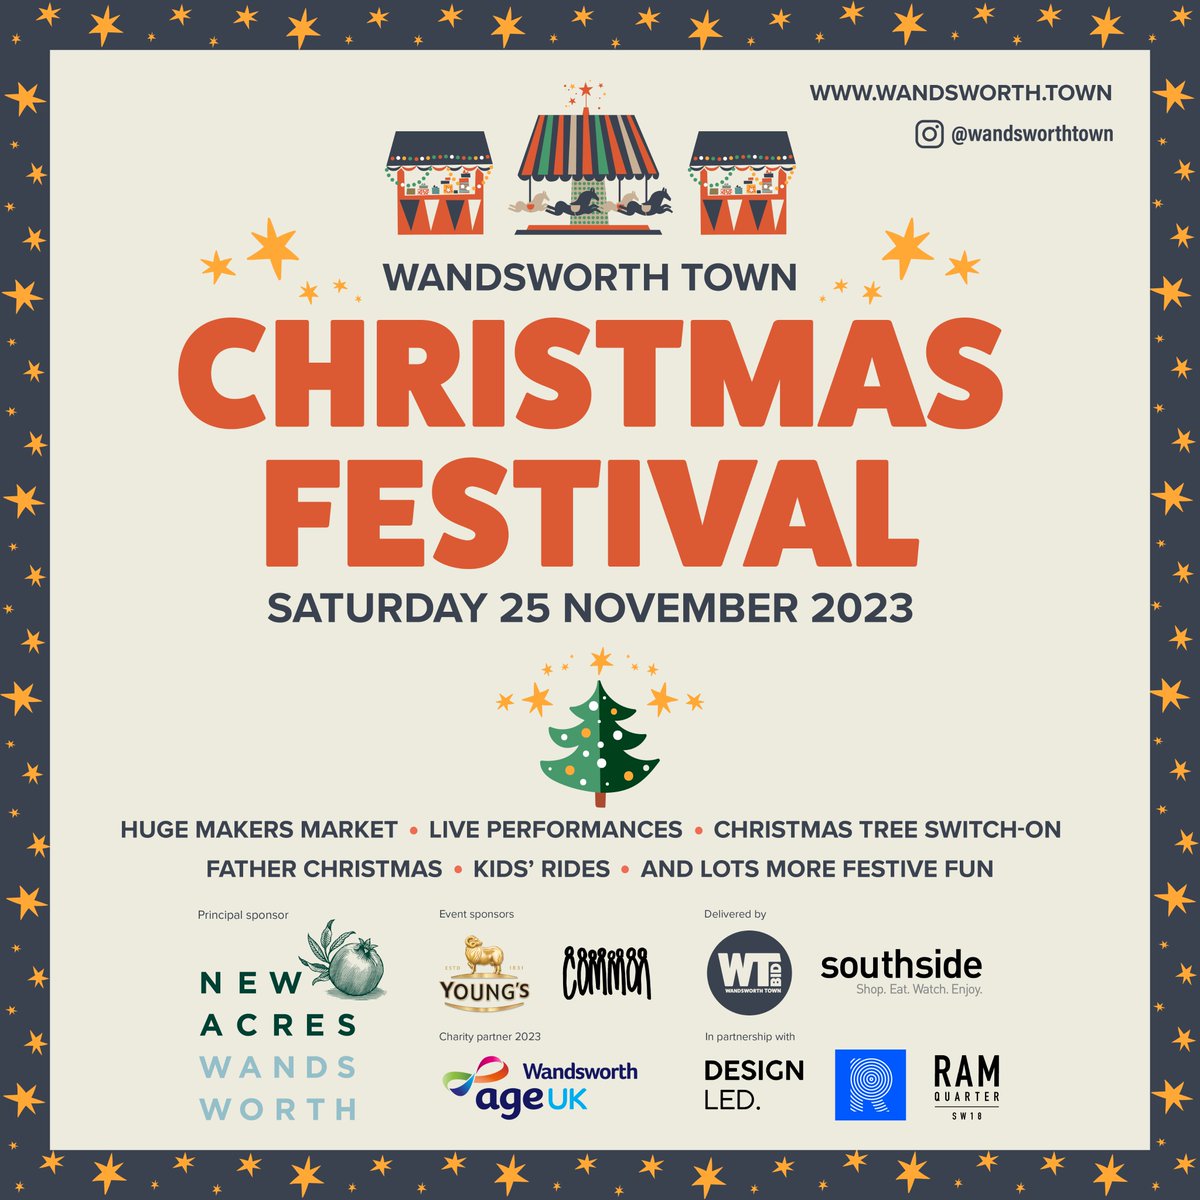 Ram Quarter’s Christmas Makers Market is back for 2023 – launching the Wandsworth Town Christmas Festival in style. Come to Bubbling Well Square at Ram Quarter from 10am on 25 November to enjoy festive entertainment for all, bespoke Christmas gifts, and great food and drink!